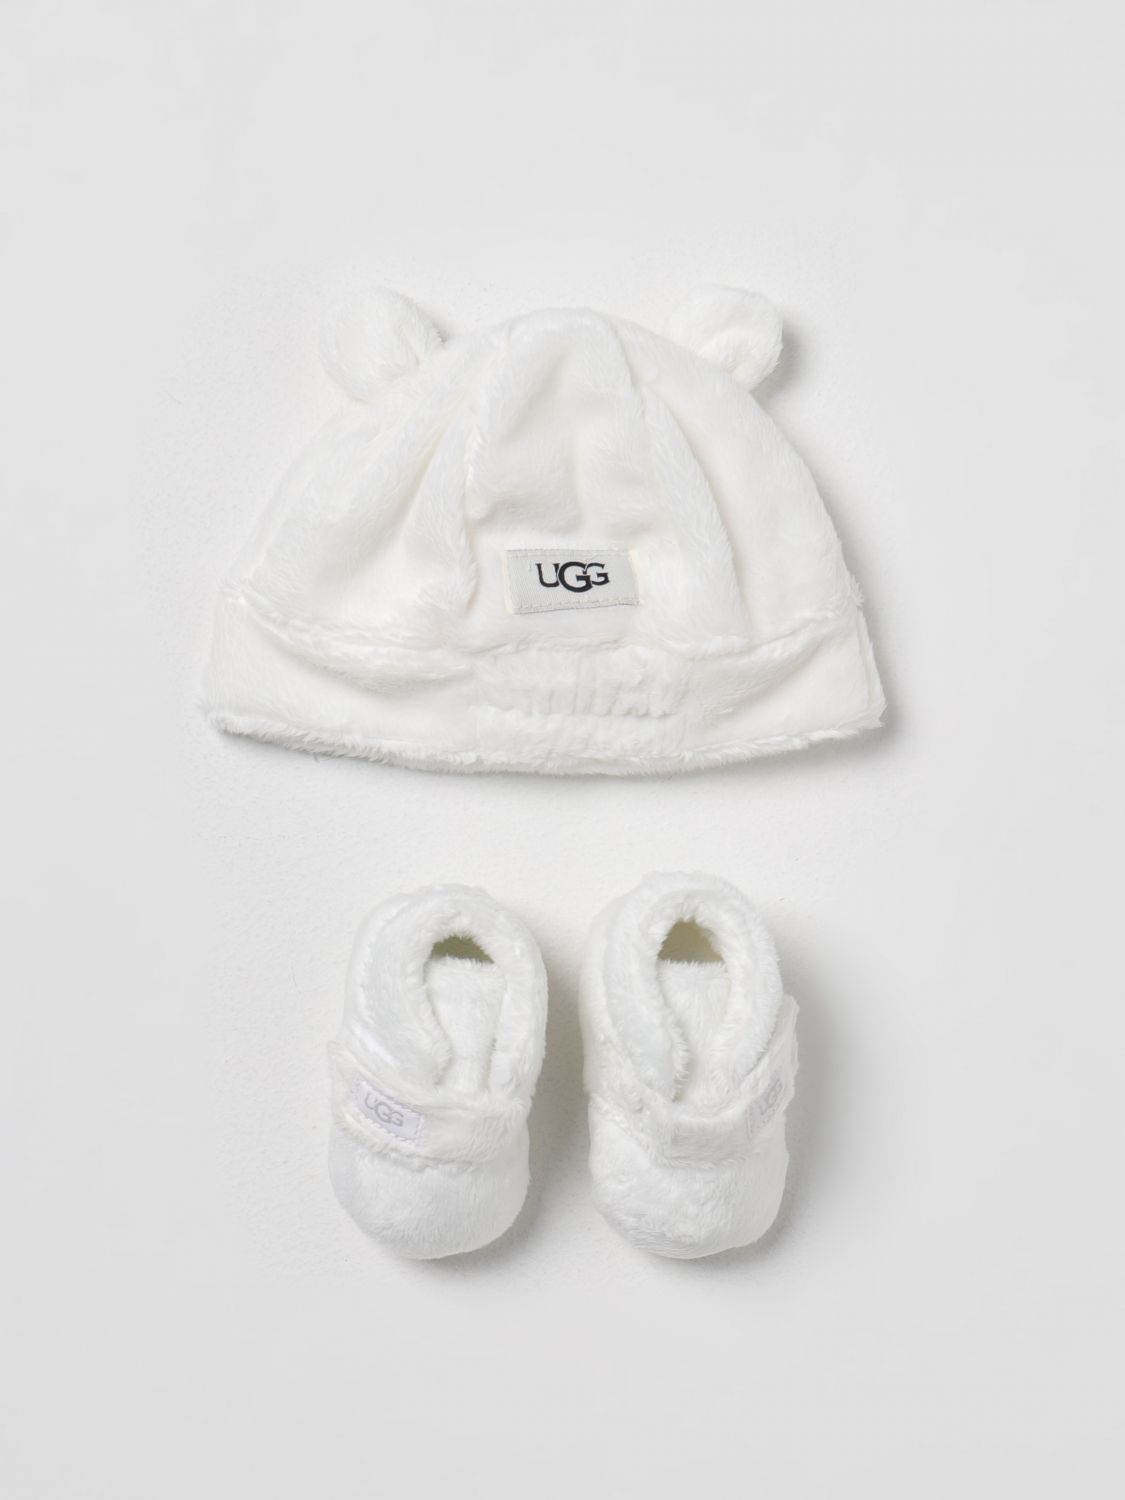 Ugg Babies' Shoes  Kids Color White